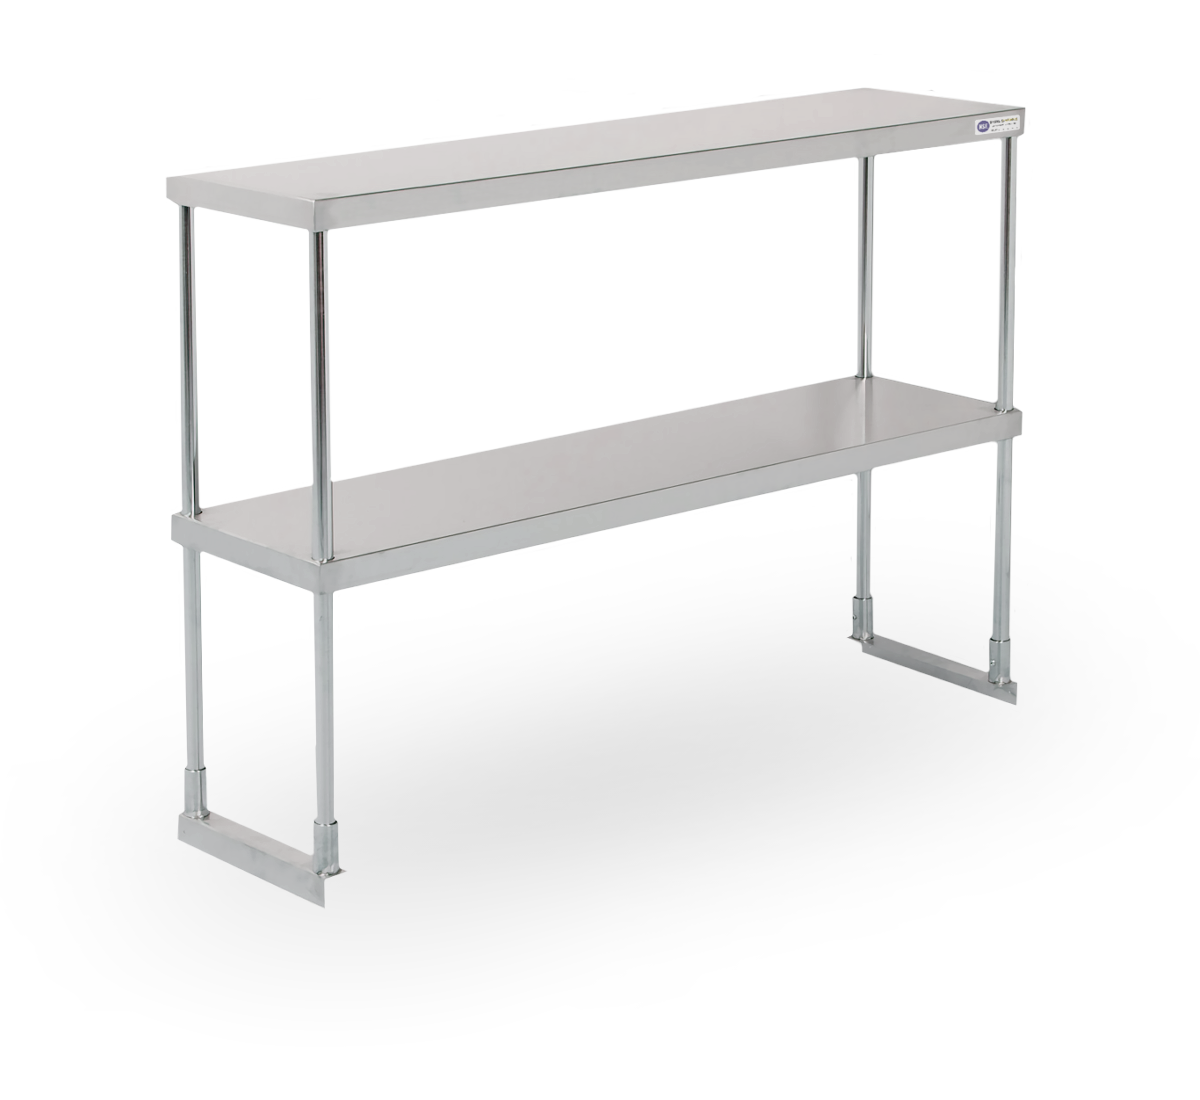 https://www.steelworks-stainless.com/wp-content/uploads/2021/04/Double-OverShelf.png